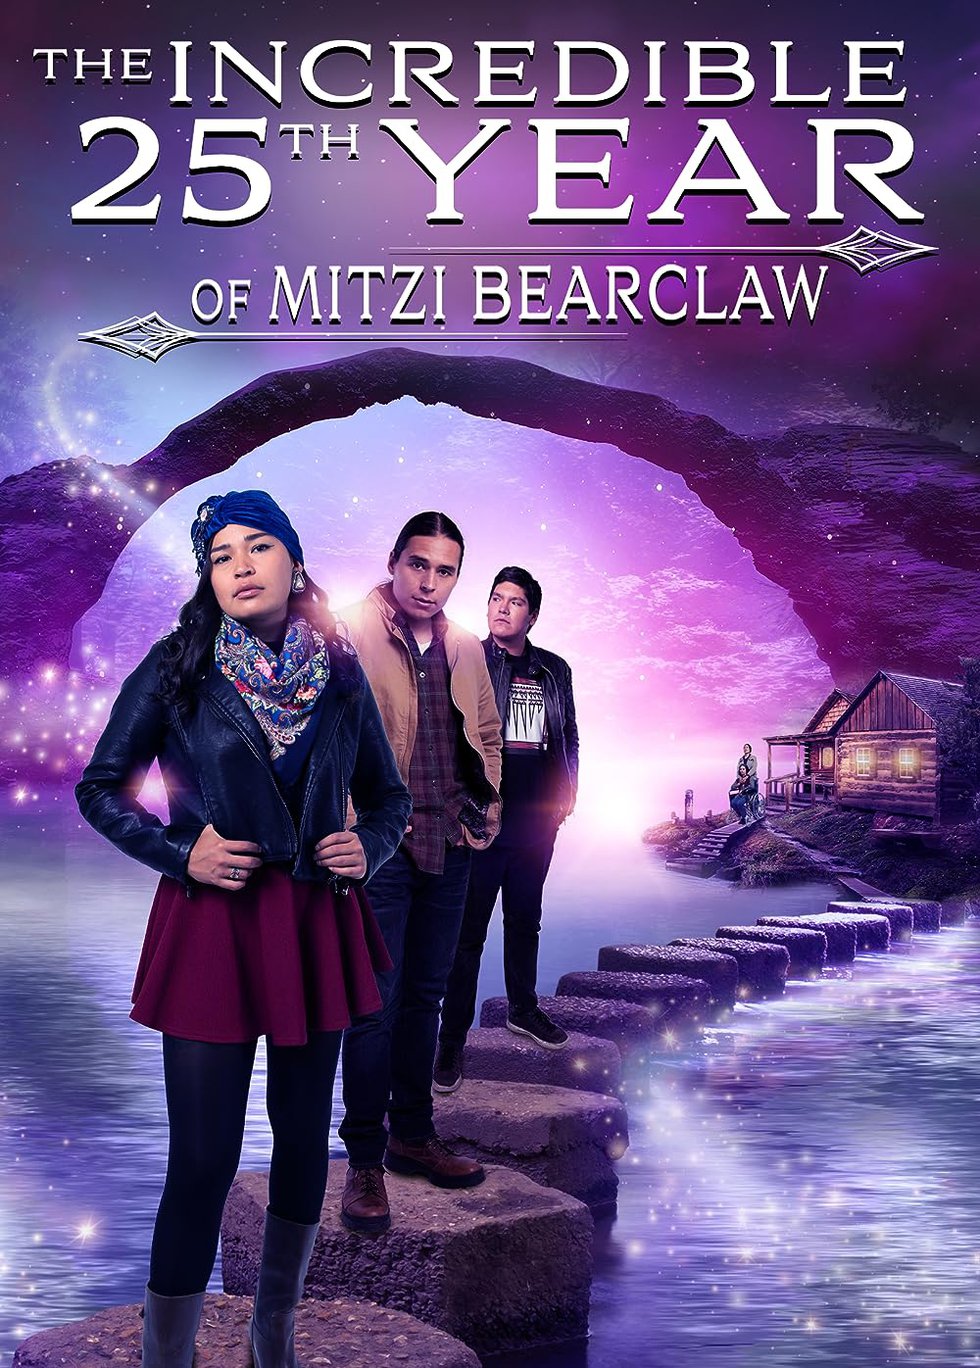 The Incredible 25th Year of Mitzi Bearclaw Comedy Film